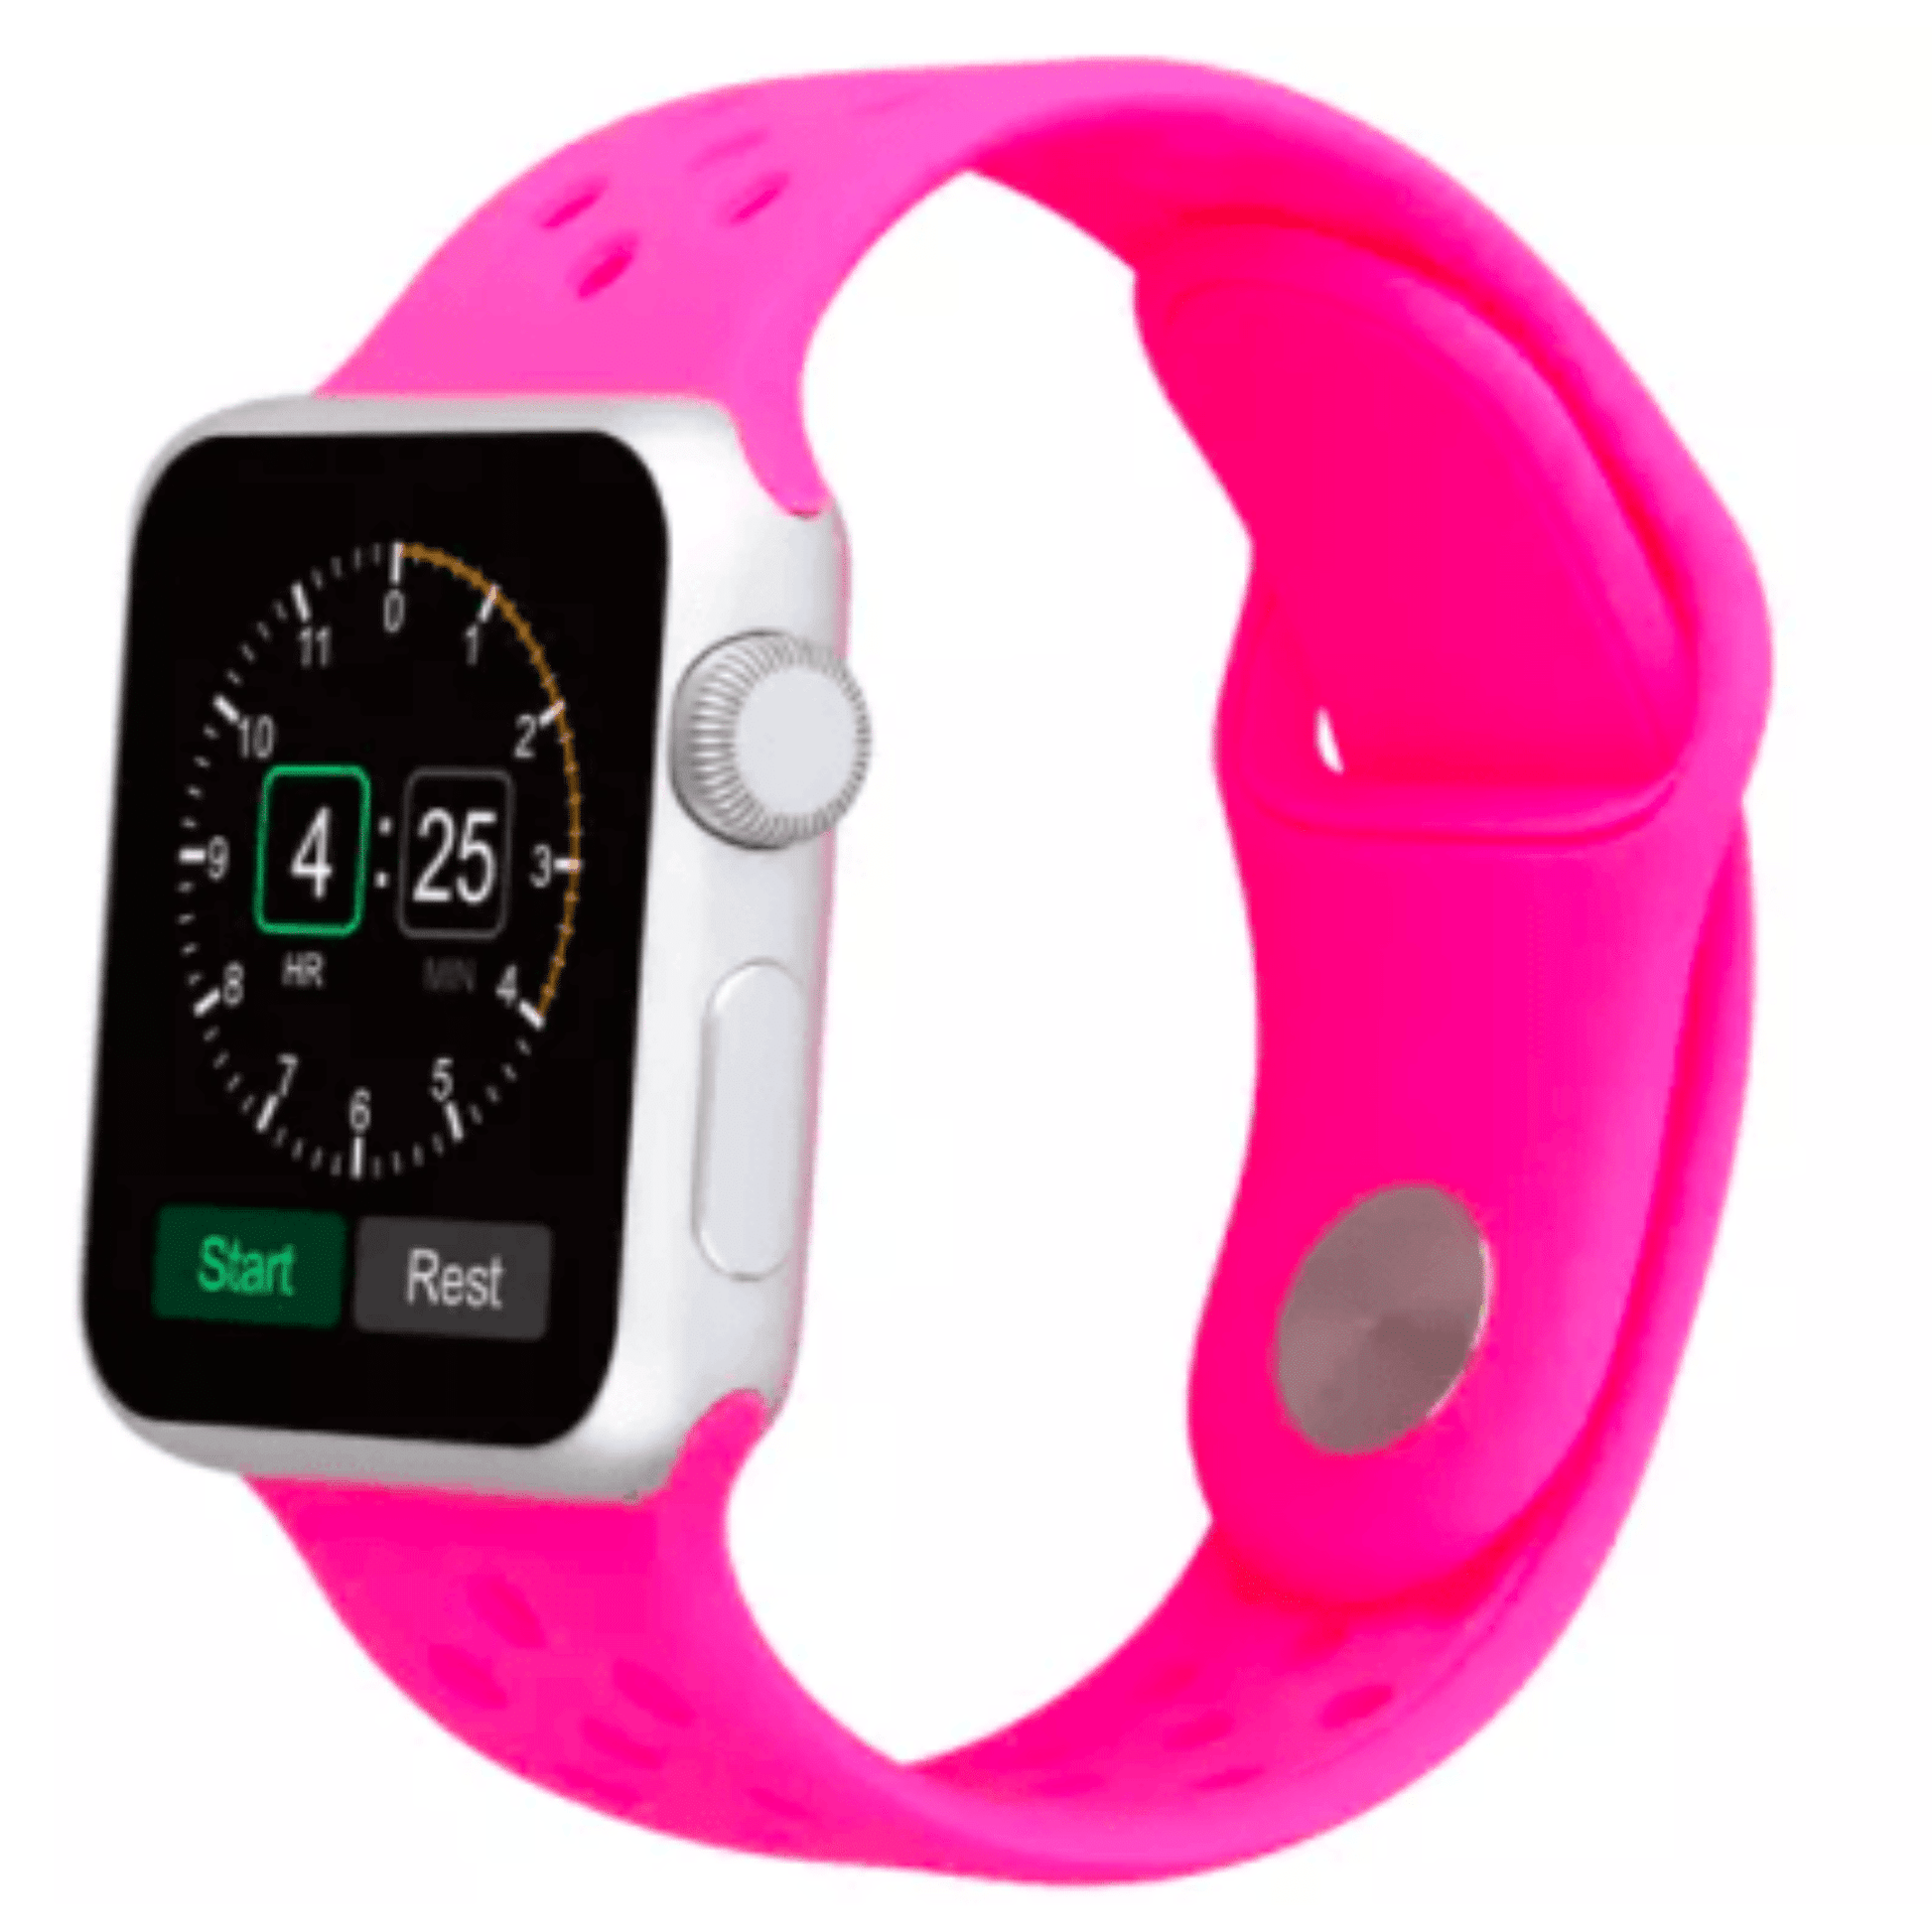 Breathable Silicone Sport Replacement Band for Apple Watch Pink Apple Watch Band Elements Watches